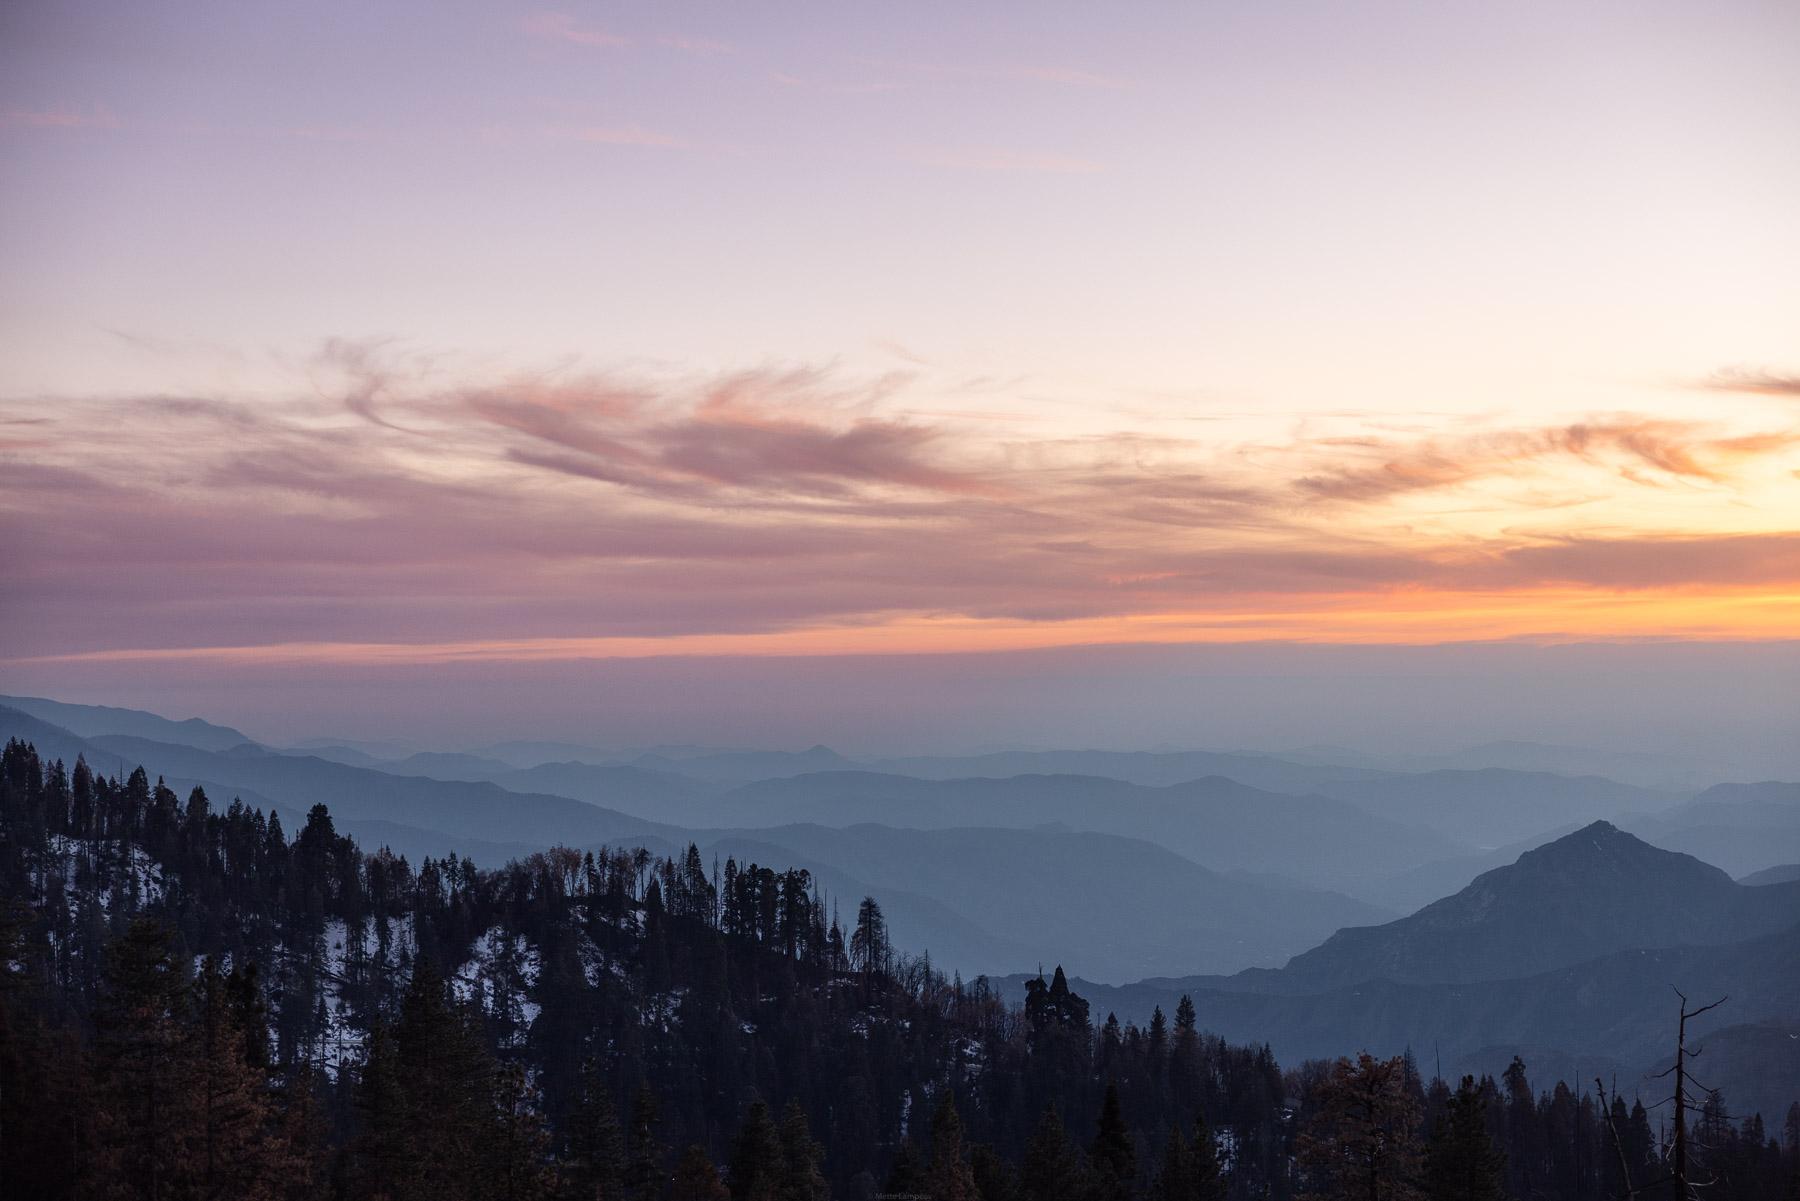 - Sequoia, a year in a burning forest - The sunset over Sequioa Natinal Park and the foot hills...